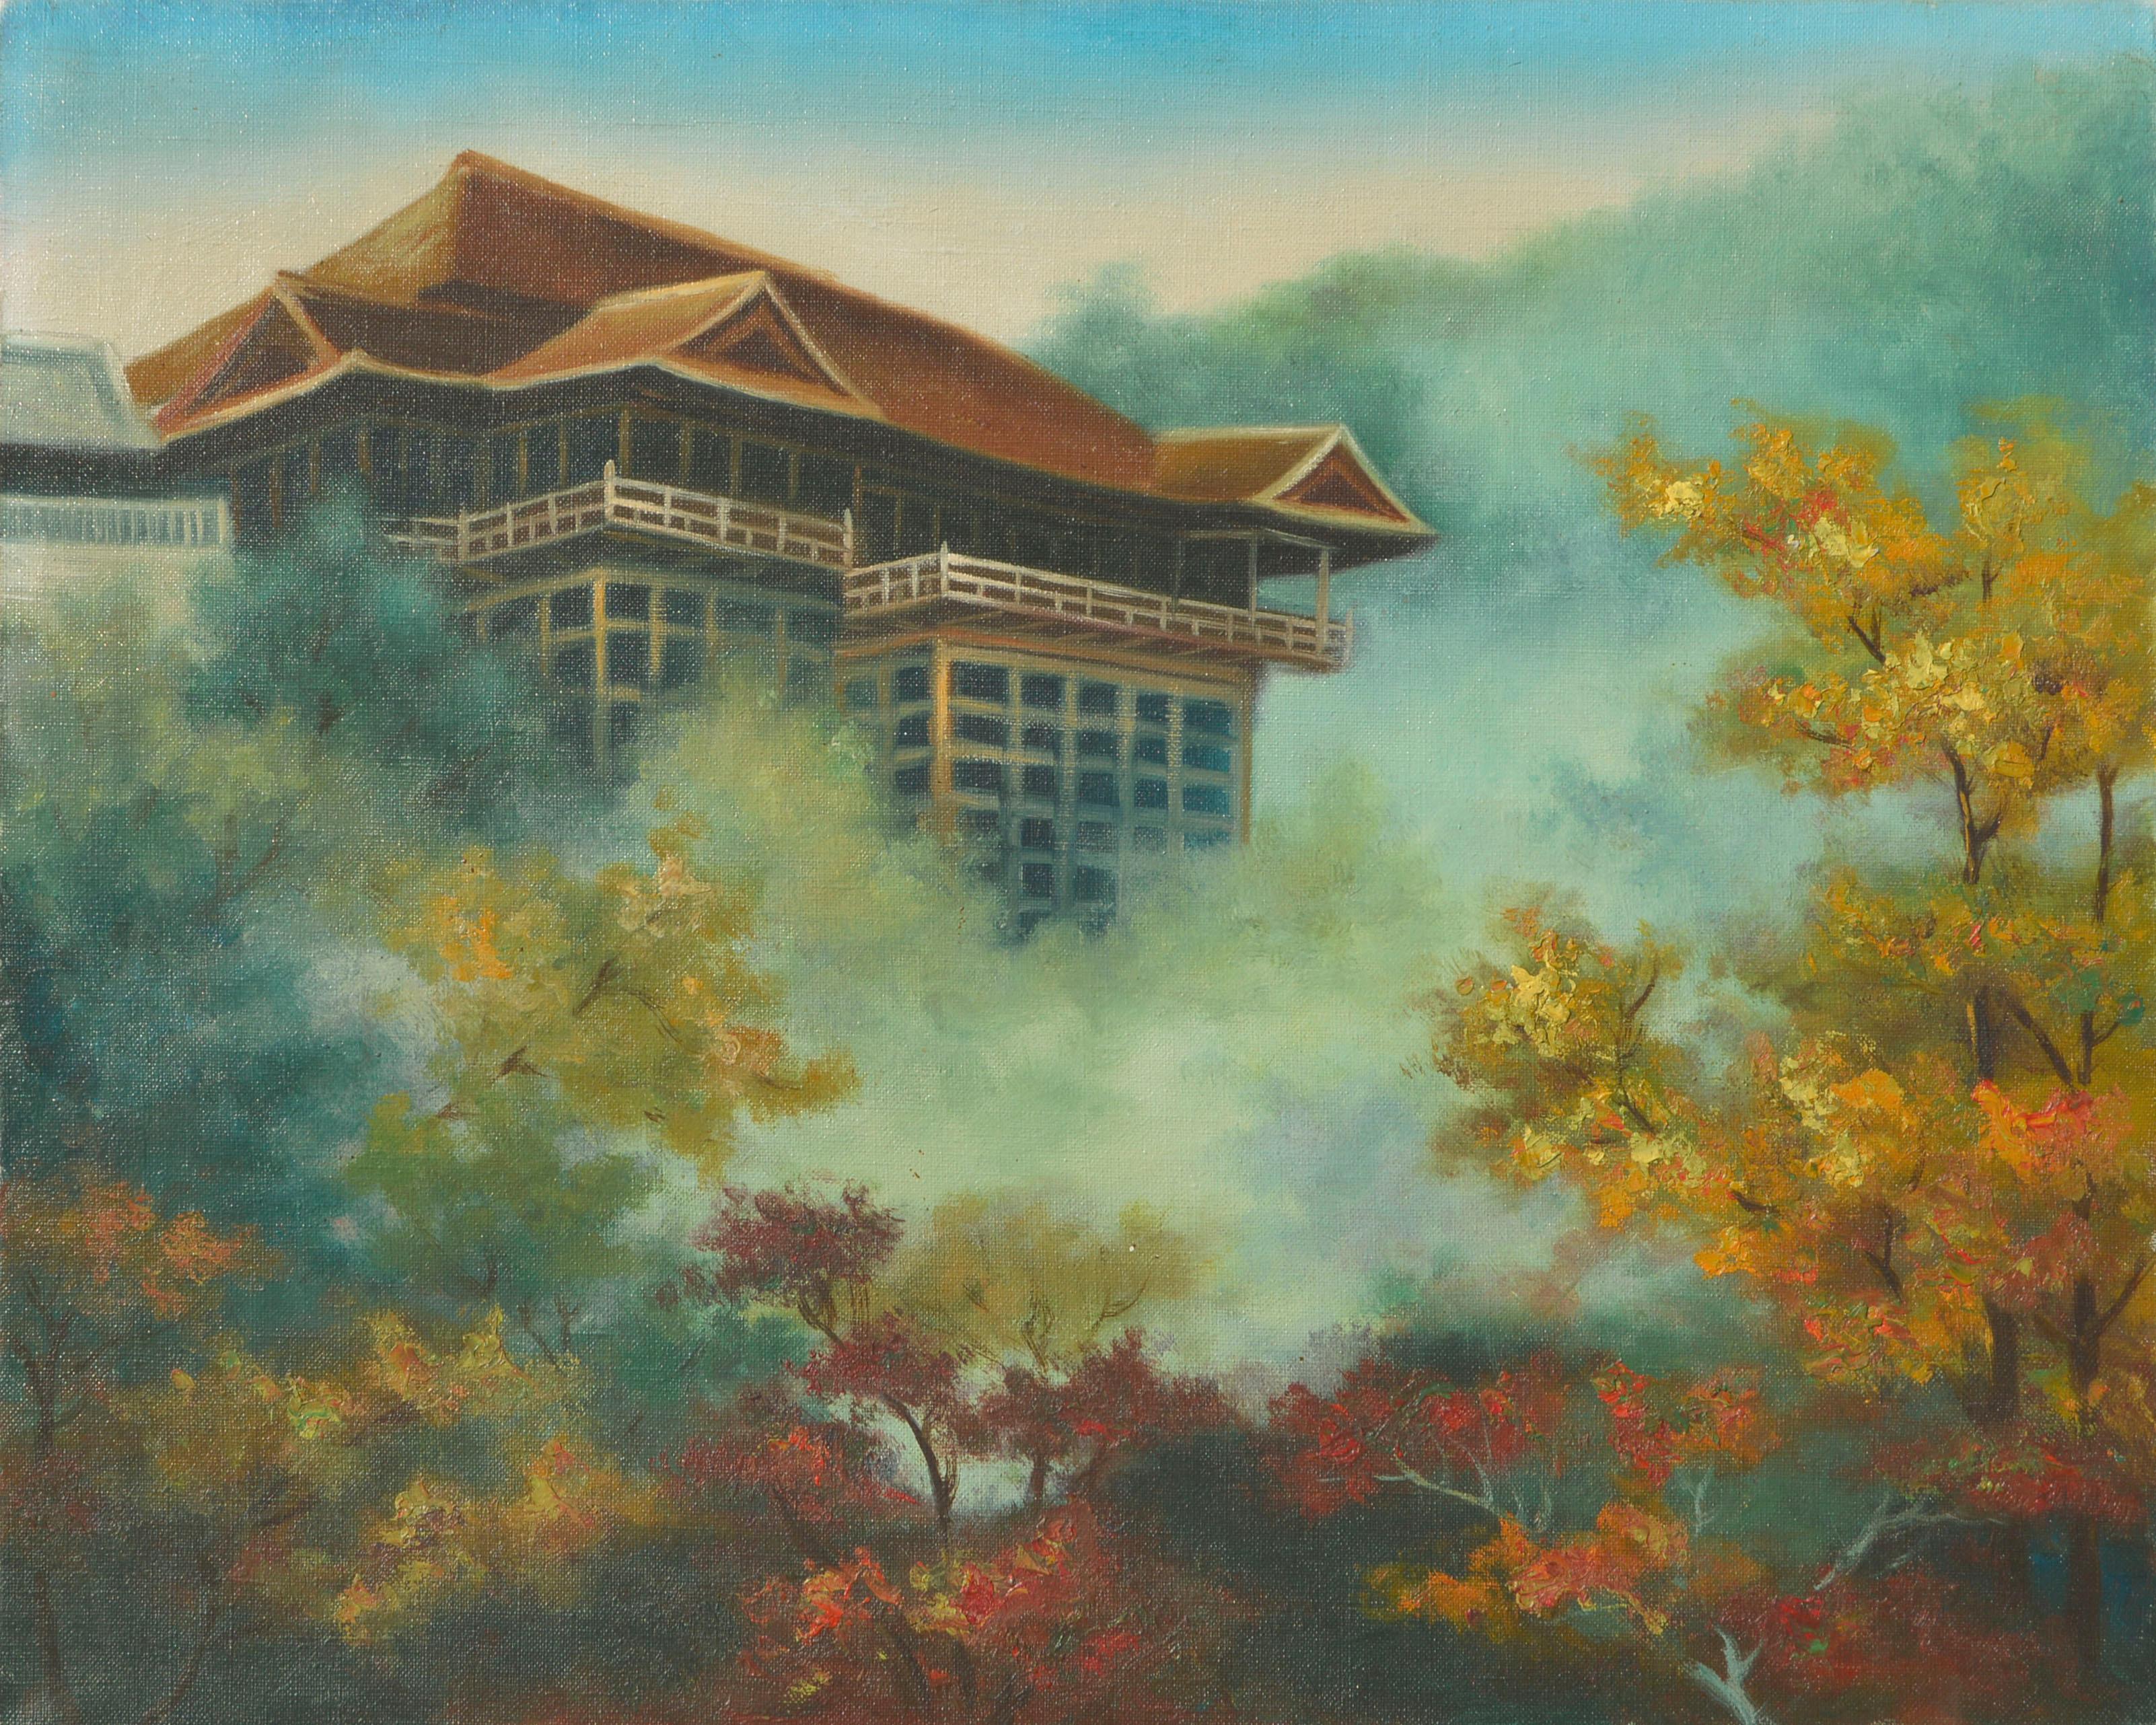 Unknown Landscape Painting - Japanese Tea House in the Mist - Mid Century Landscape